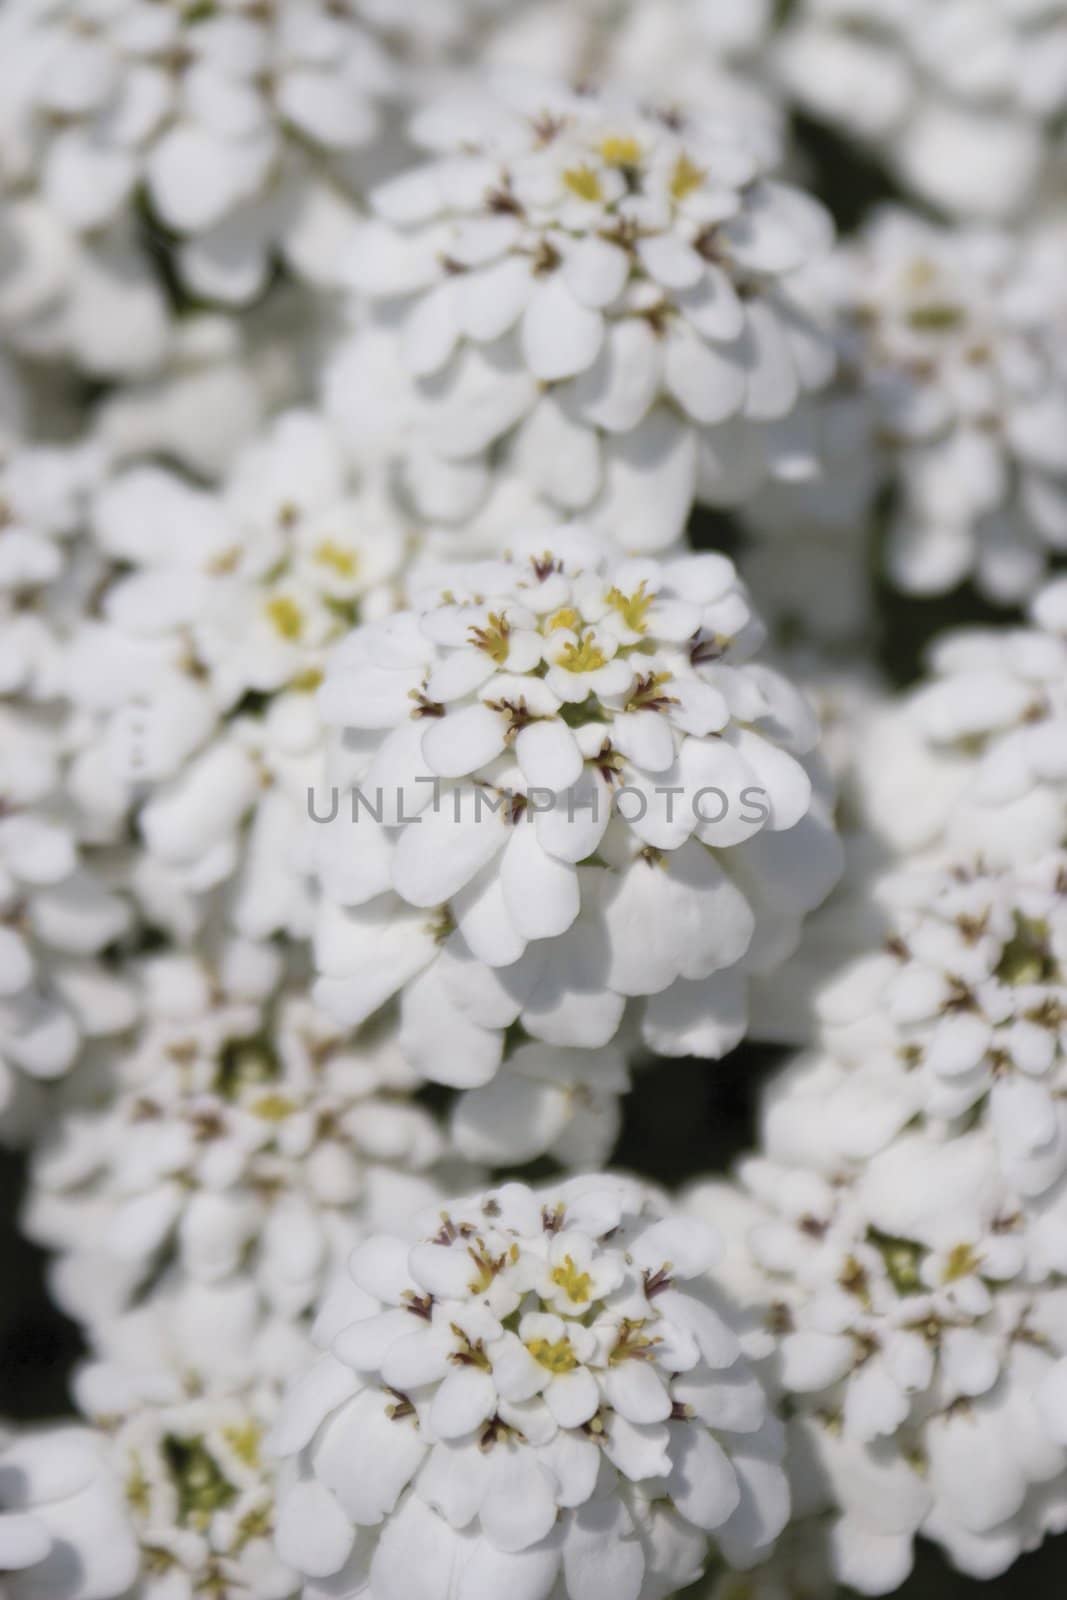 Extreme close up with shallow depth of field, macro style, of white flower